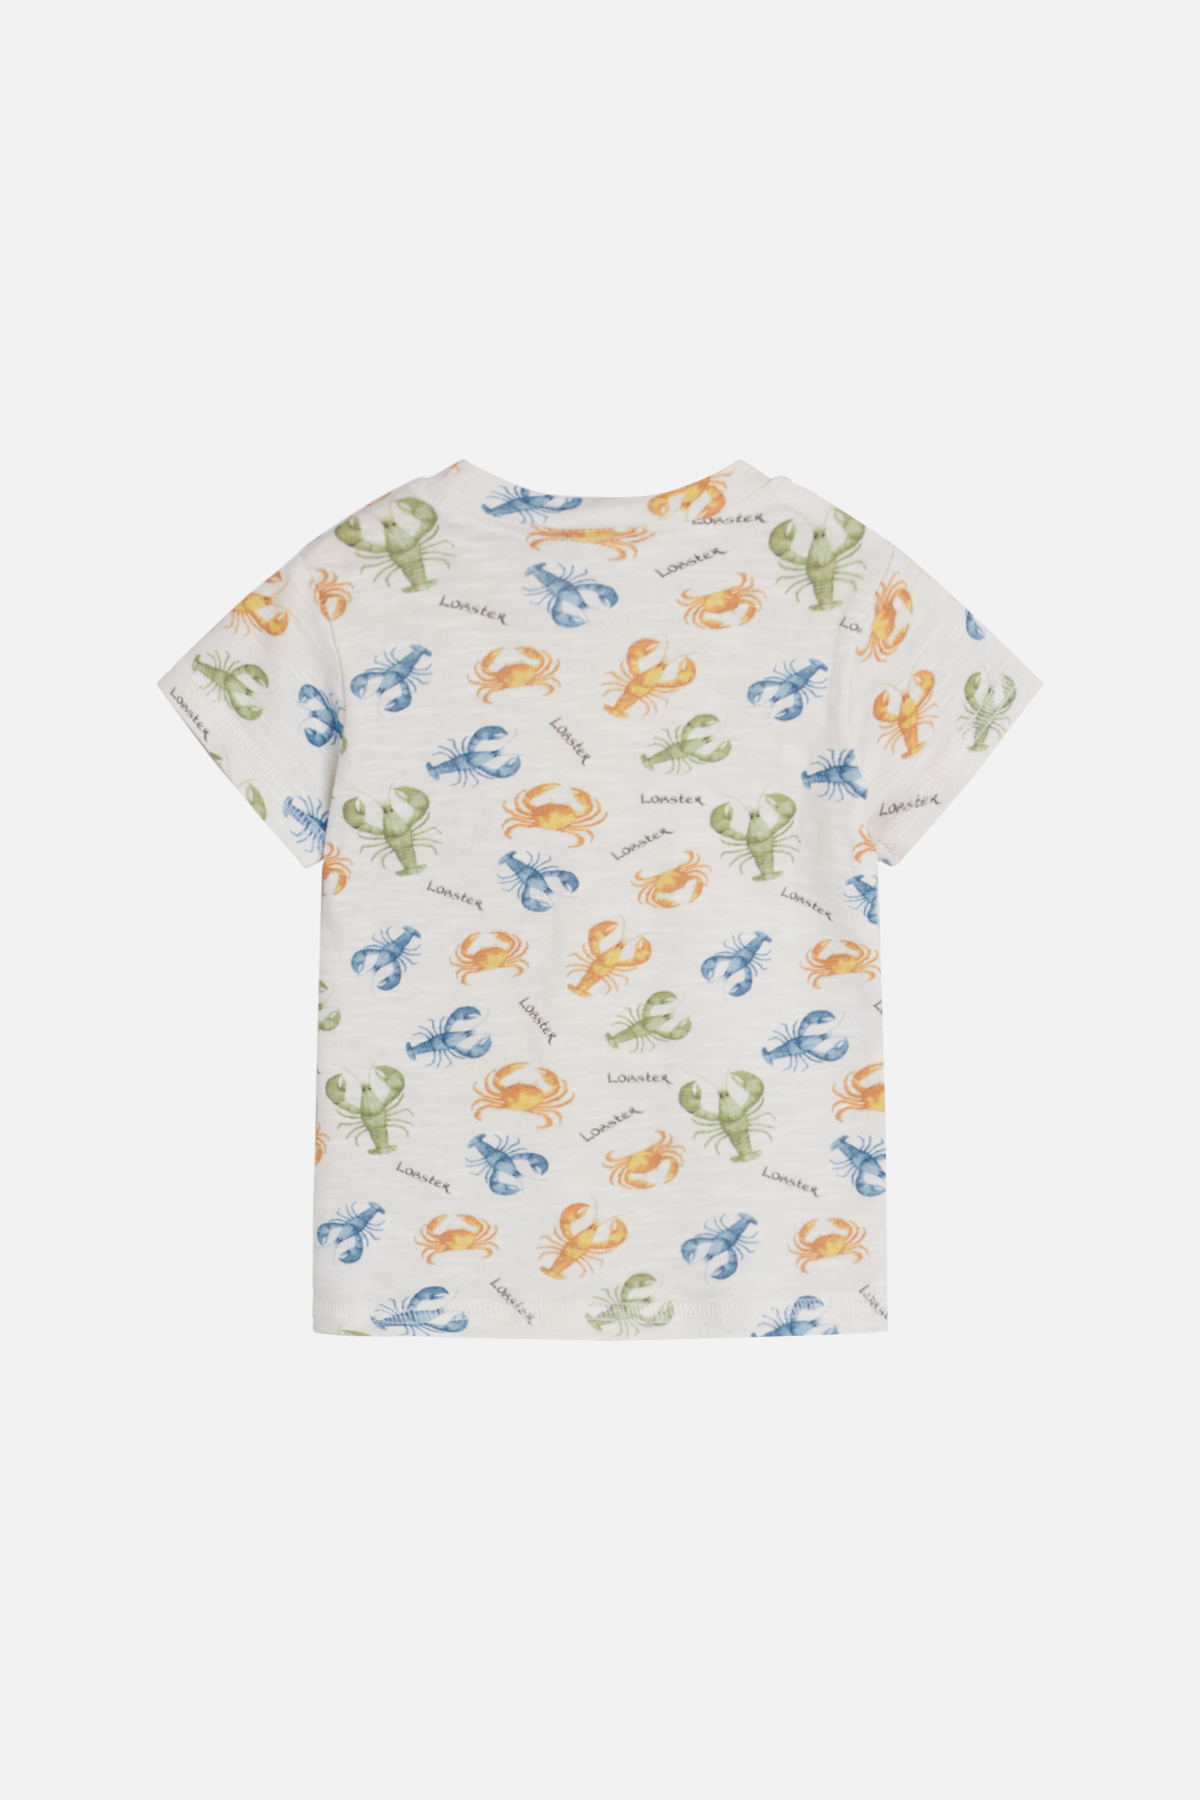 Hust&Claire T-shirt 'Lobster'